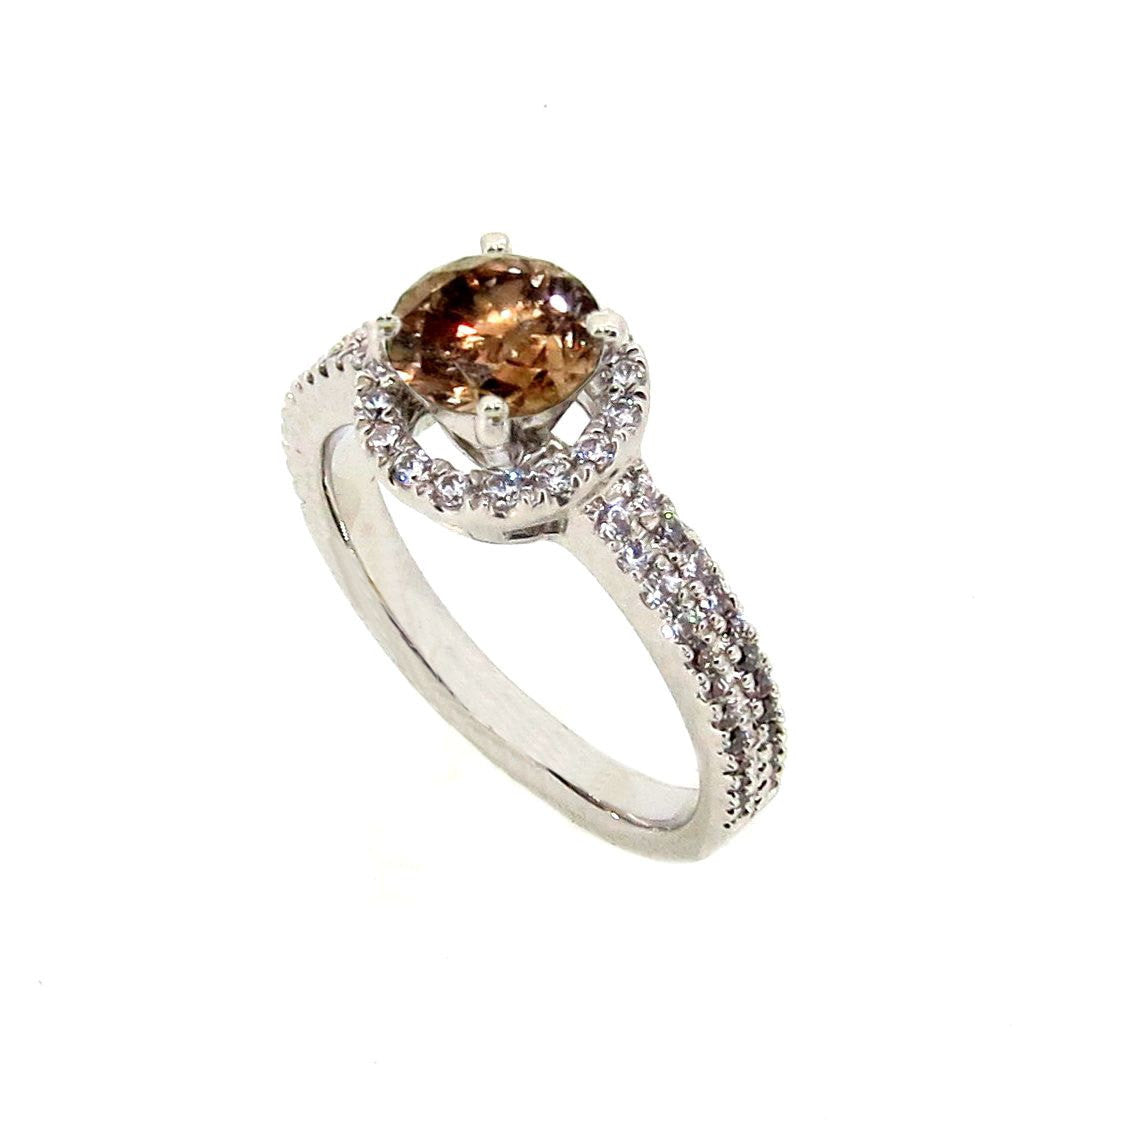 Floating Halo Engagement Ring, 1 Carat Fancy Brown Diamond Center Stone with Diamond Accent Stones, Anniversary Ring - BD85034